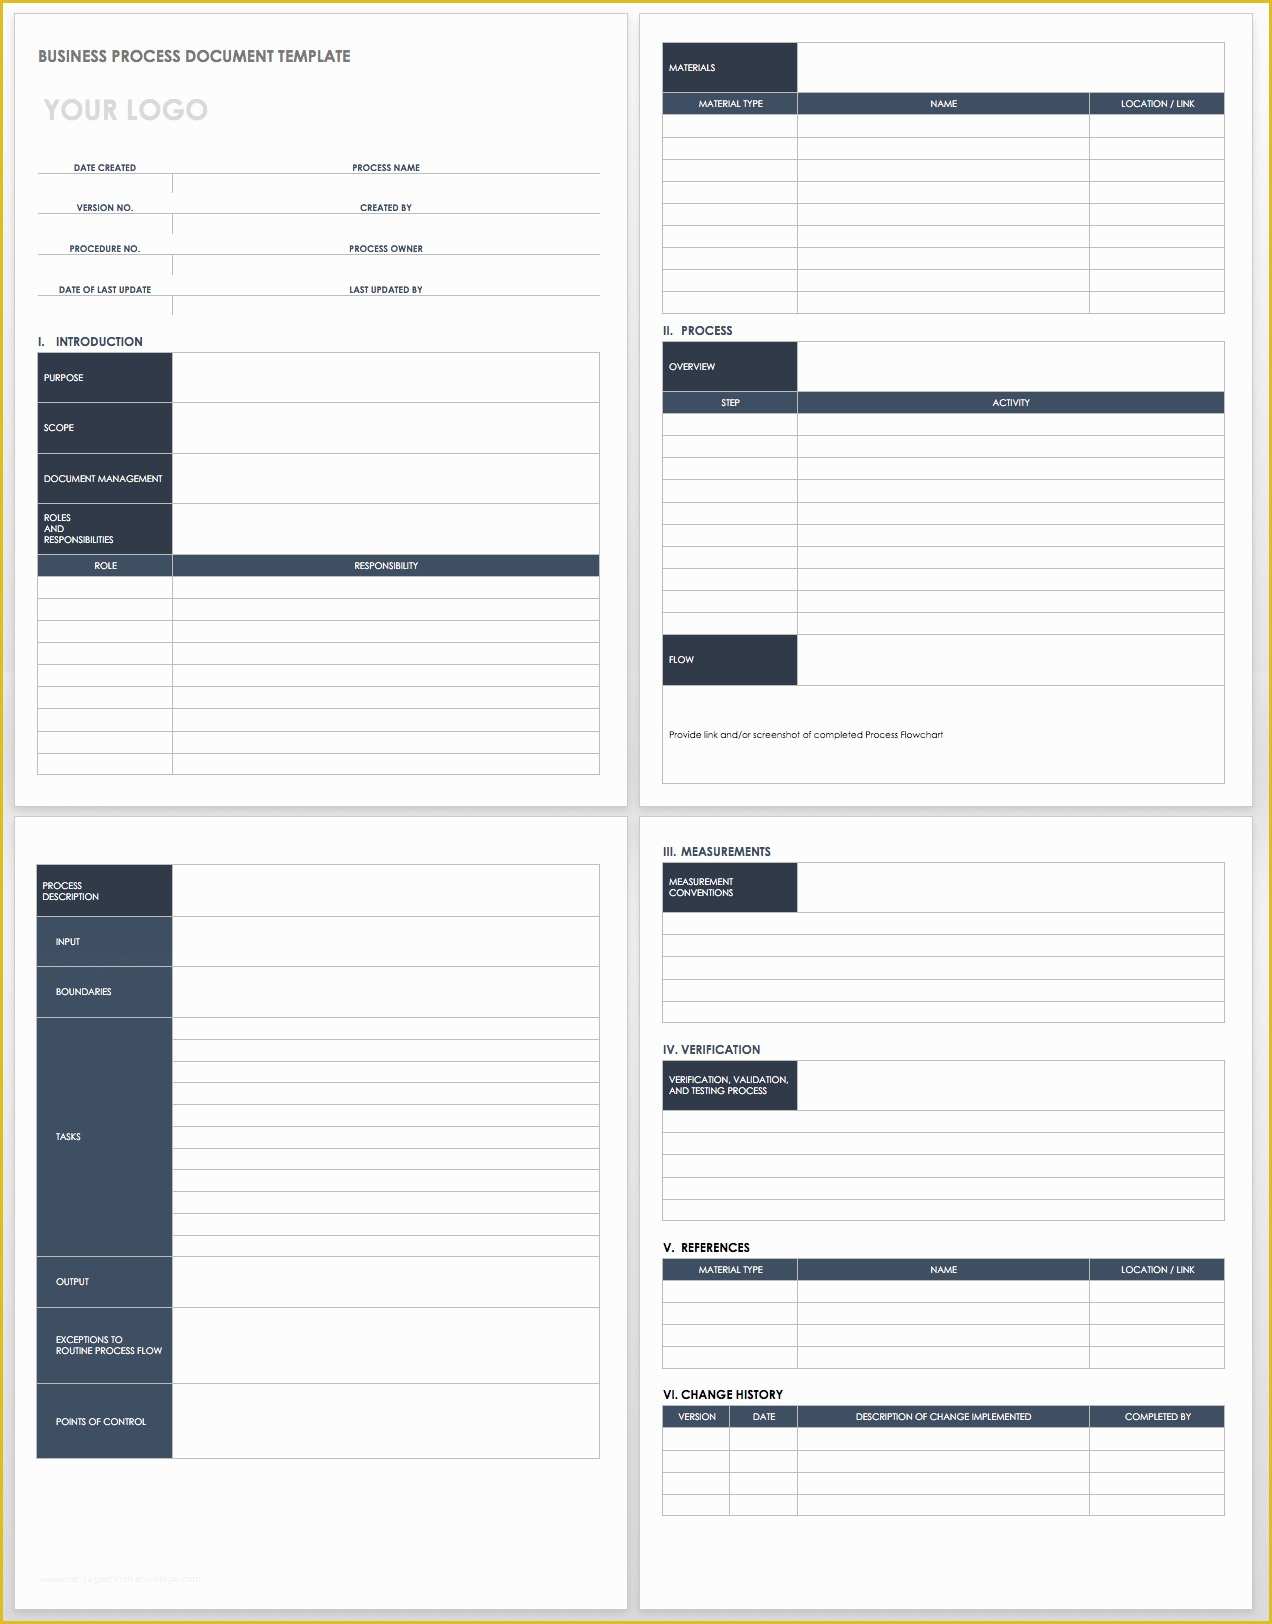 Free Business Process Template Of Free Process Document Templates